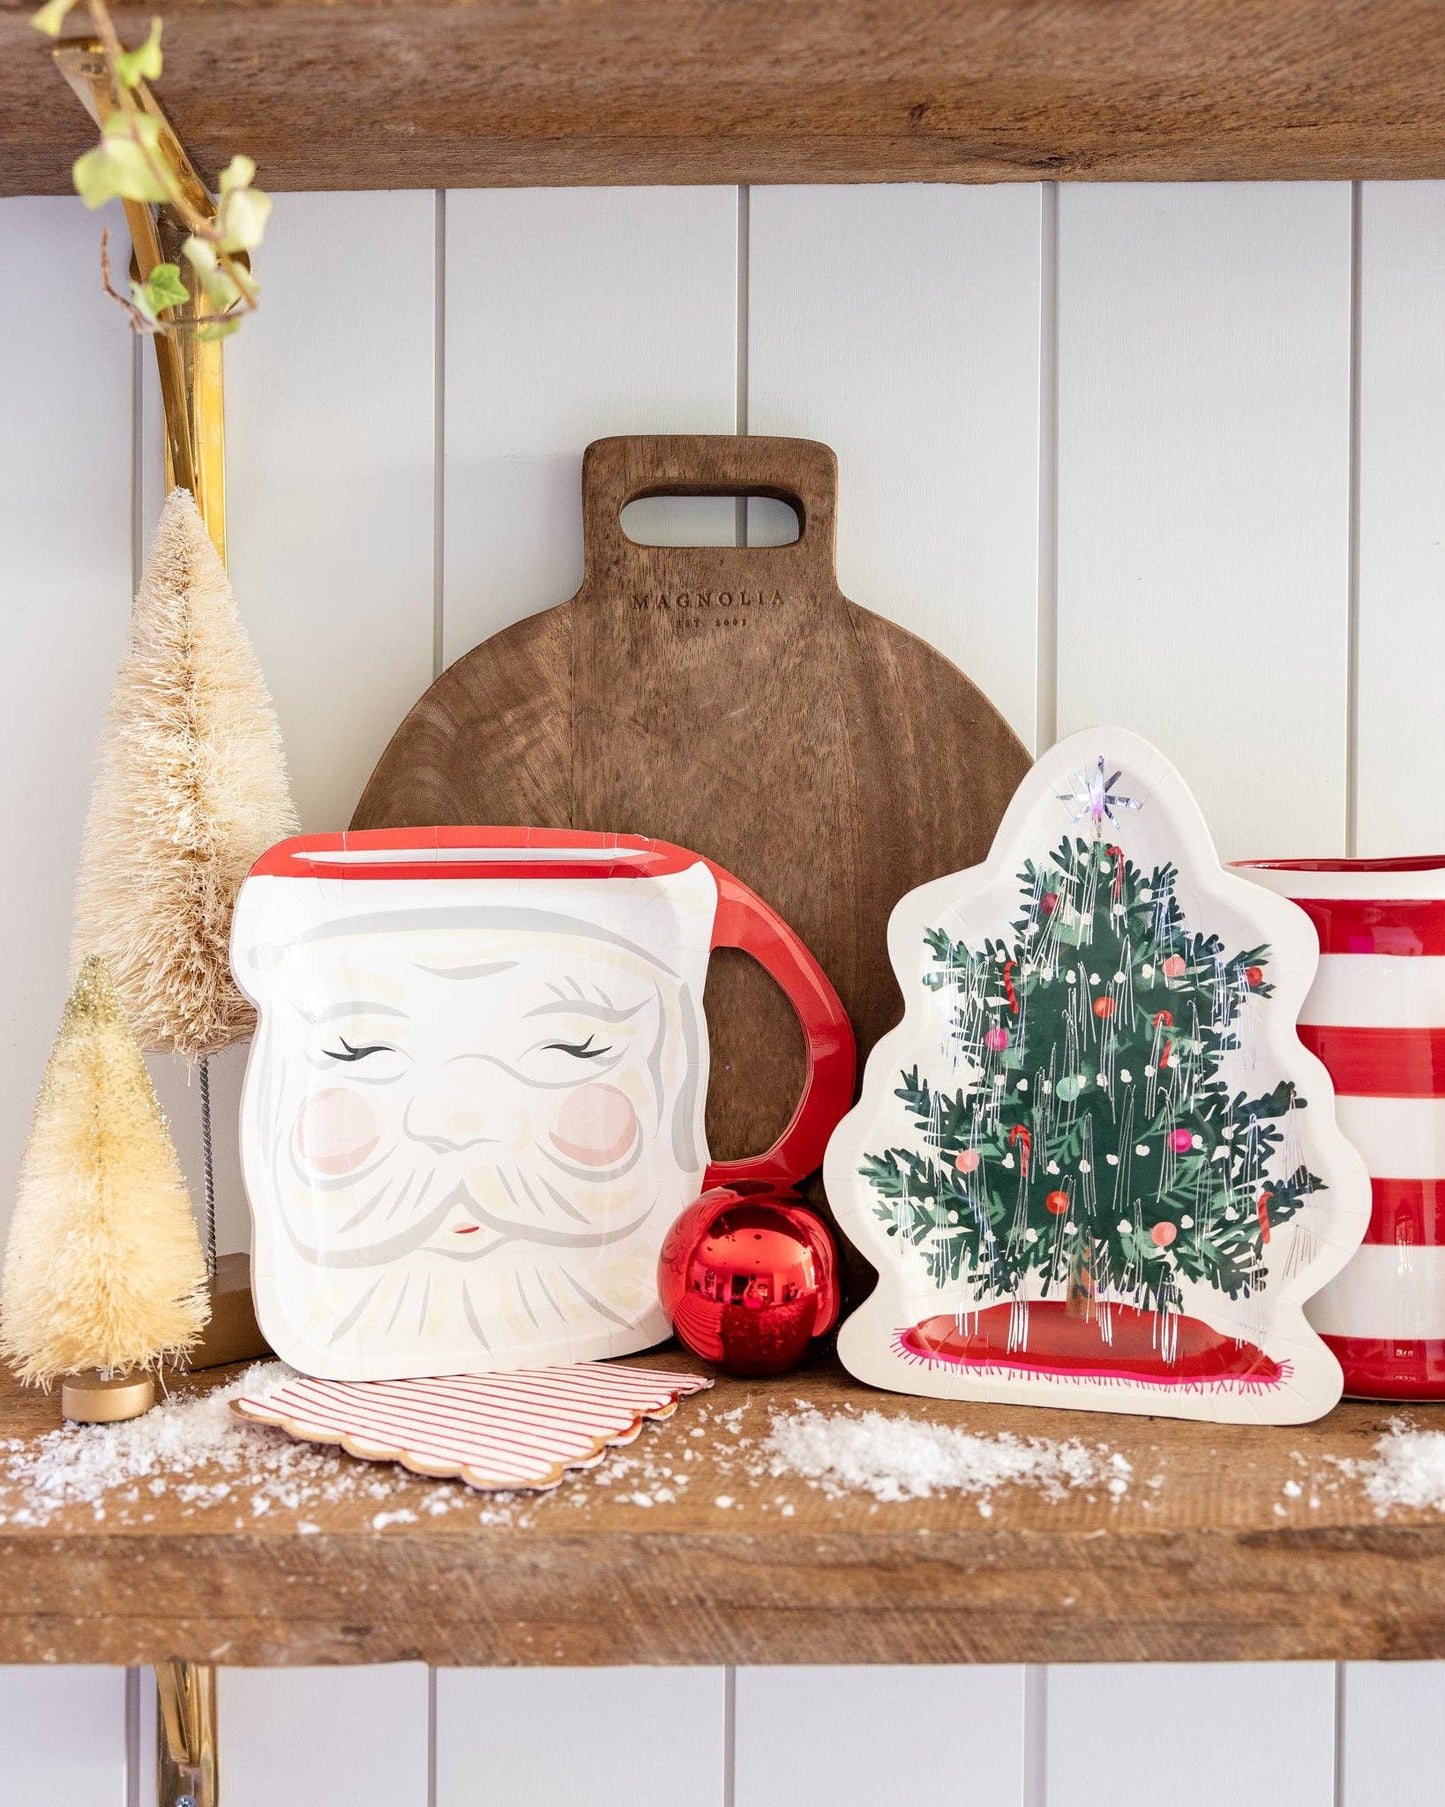 Shaped to resemble a retro Santa mug, these party paper plates add a festive Christmas touch at any holiday celebrations and are sure to put your loved ones in a delightful holiday spirit.